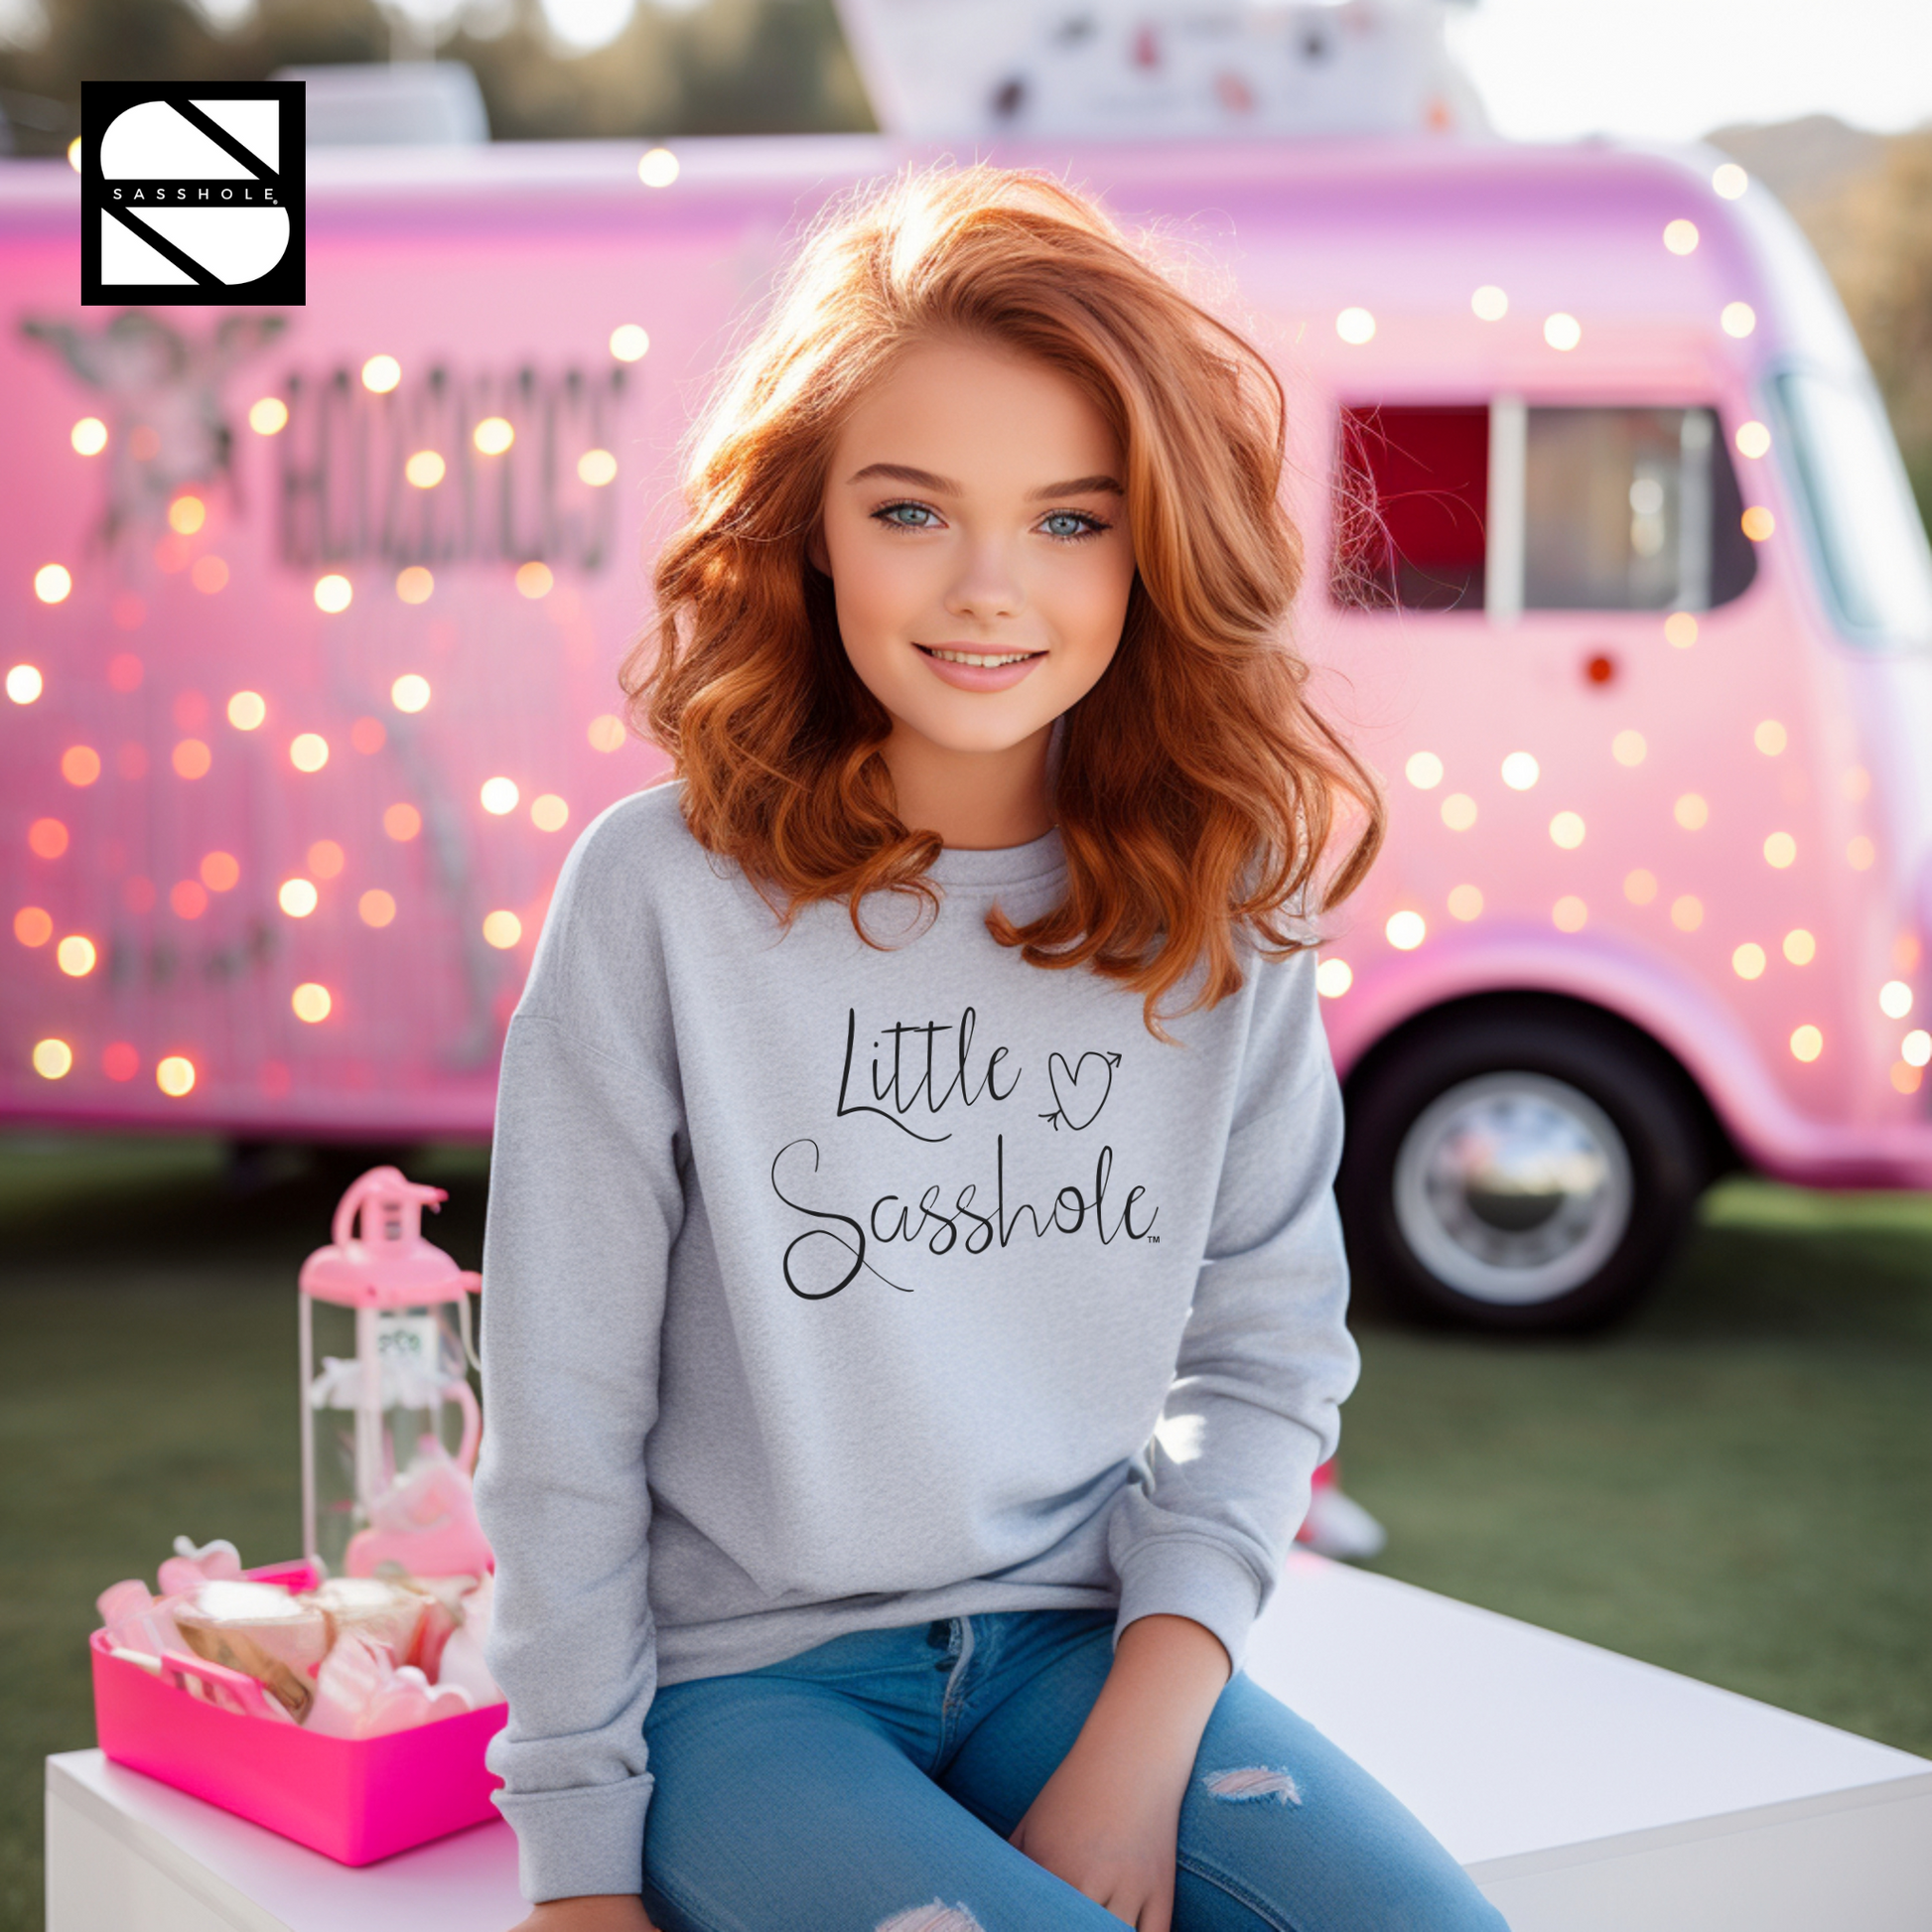 Youthful vibes, Youthful expressions, Youthful comfort, Youth hoodie, Youth girls sweatshirt, Vibrant styles, Urban chic for kids, Unique sweatshirt designs, Unique hoodie designs, Trendy kids' fashion, Trendy kids clothing, Trendsetting toddlers, Toddler street style, Sweatshirts, Sweatshirt fashion for girls, Stylish youngsters, Statement apparel for kids, Sassy kids wear, Sasshole Youth Collection, Sass meets comfort